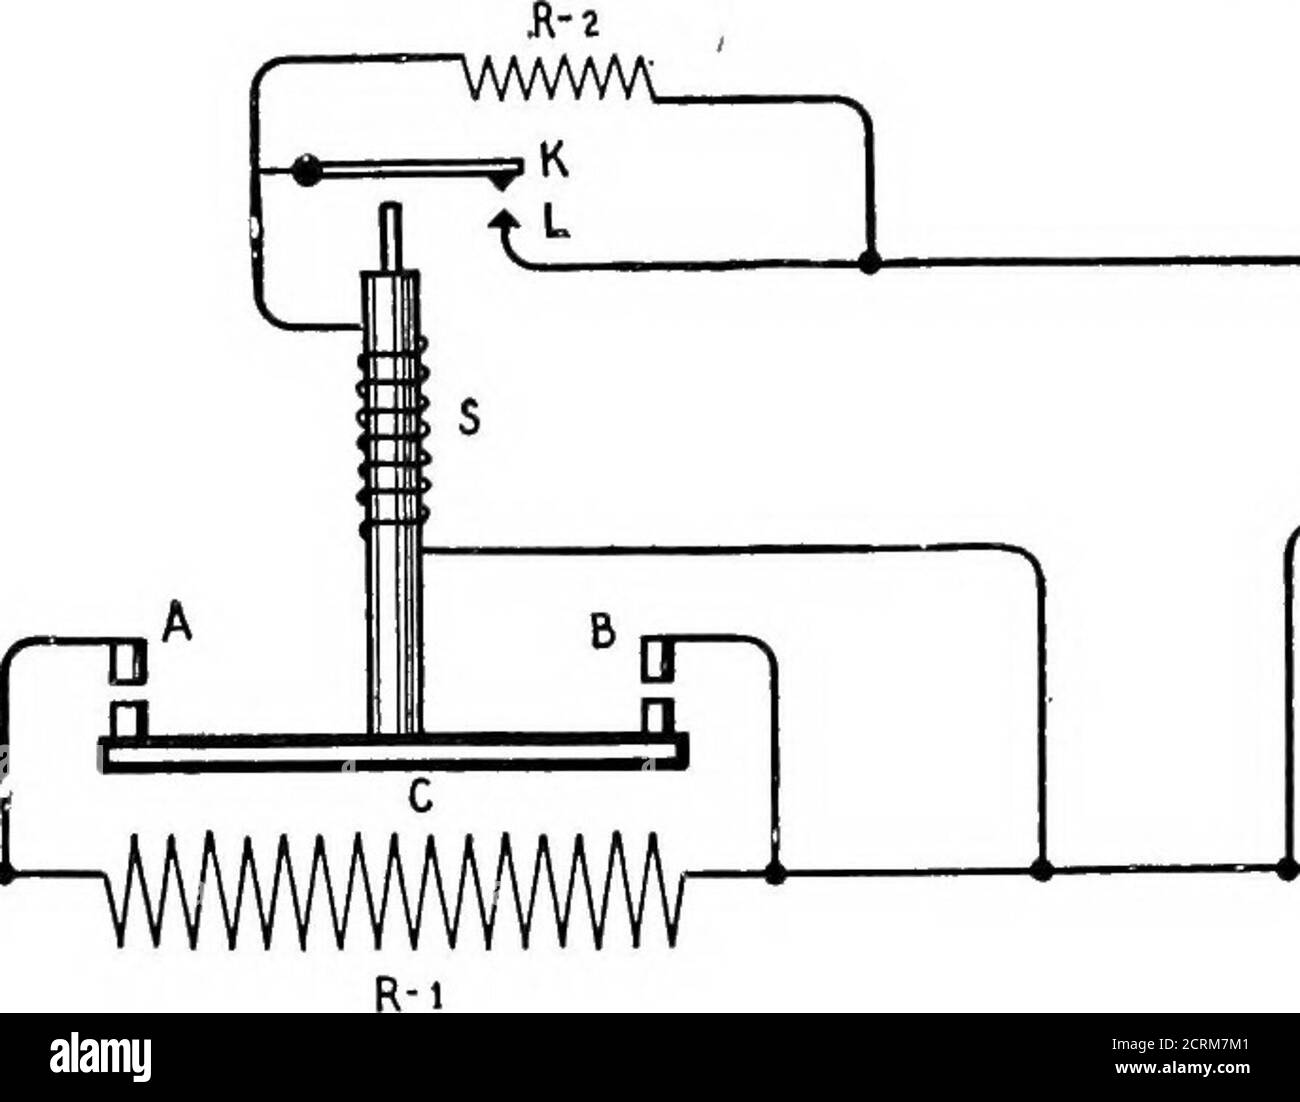 . Practical wireless telegraphy; a complete text book for students of radio communication . R-2 /1 FIELD no VOLT D.C Fig. 72—General Electric Companys Hand Starter Connected to Shunt Wound Motor. The release magnet M, Fig. 71, serves to protect the motor in case the mainline circuit is disconnected or should by accident the circuit to the motor Heldwindings be broken. In either event the handle H Hies back to the starting posi-tion by the tension of a spring attached to the bearing of the handle, and thusinterrupts the circuit to the armature. 60 PRACTICAL WIRELESS TELEGRAPHY. The General Ele Stock Photo